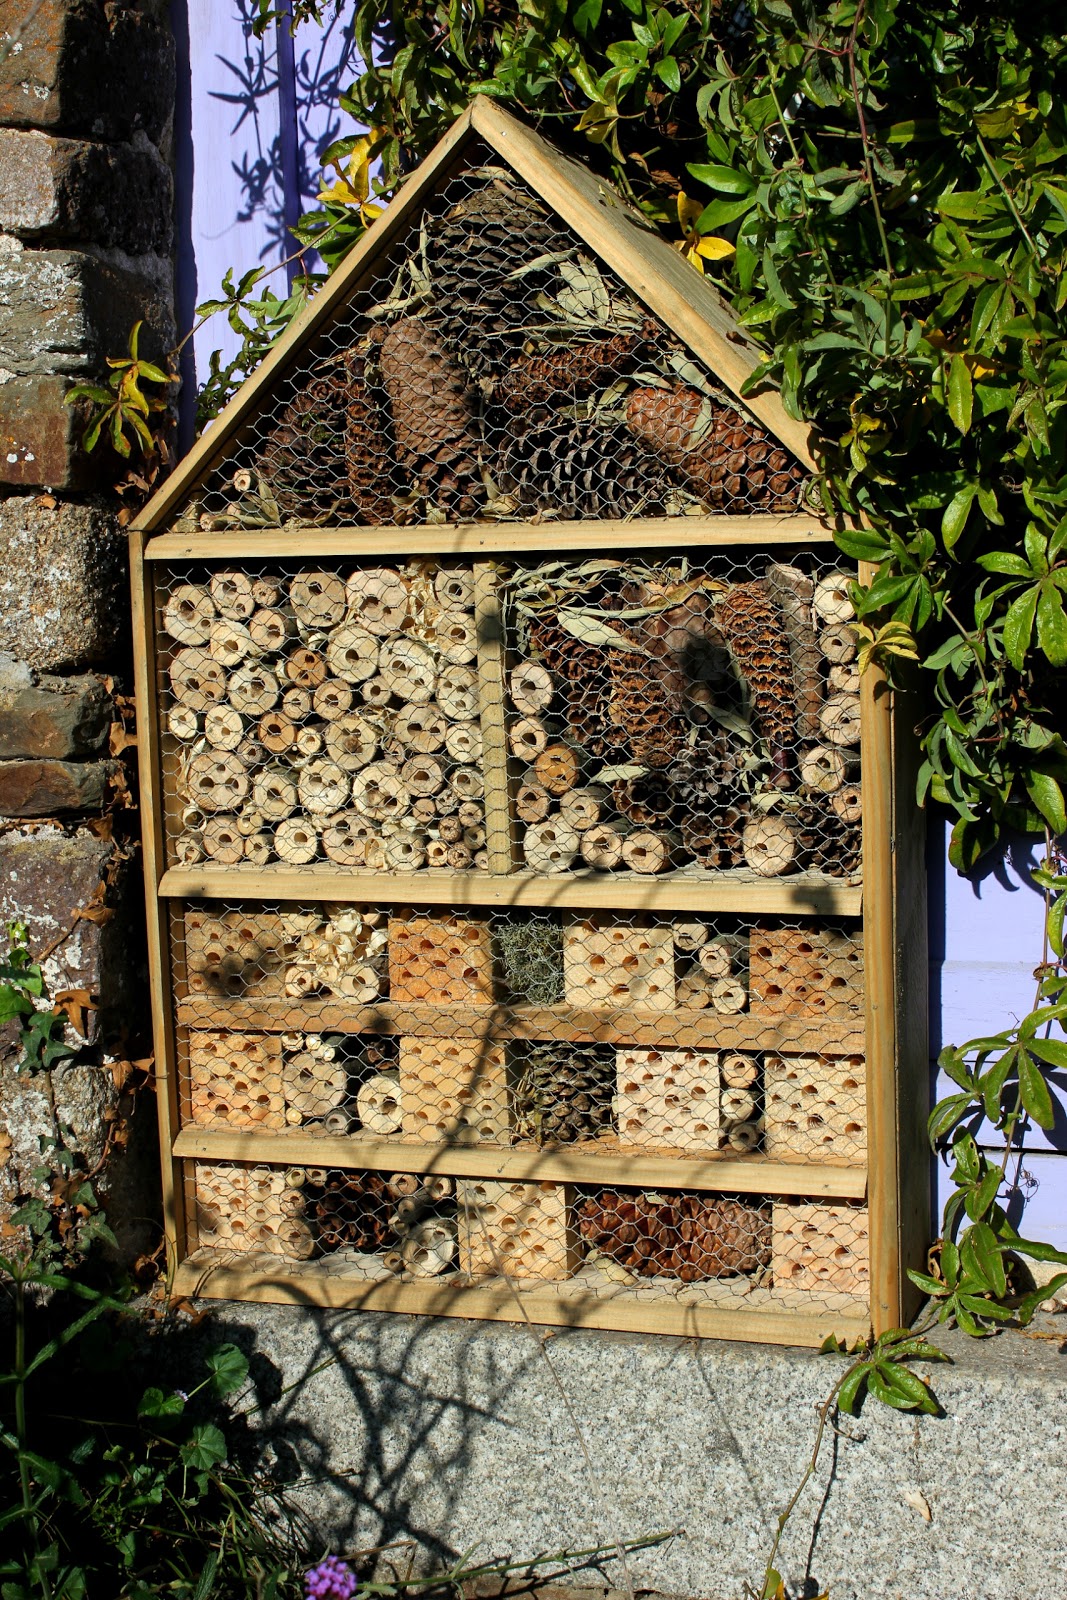 Home-made Repurposed Wood, Luxury Insect Hotel or Five Star Bug House for the Discerning Arthropod